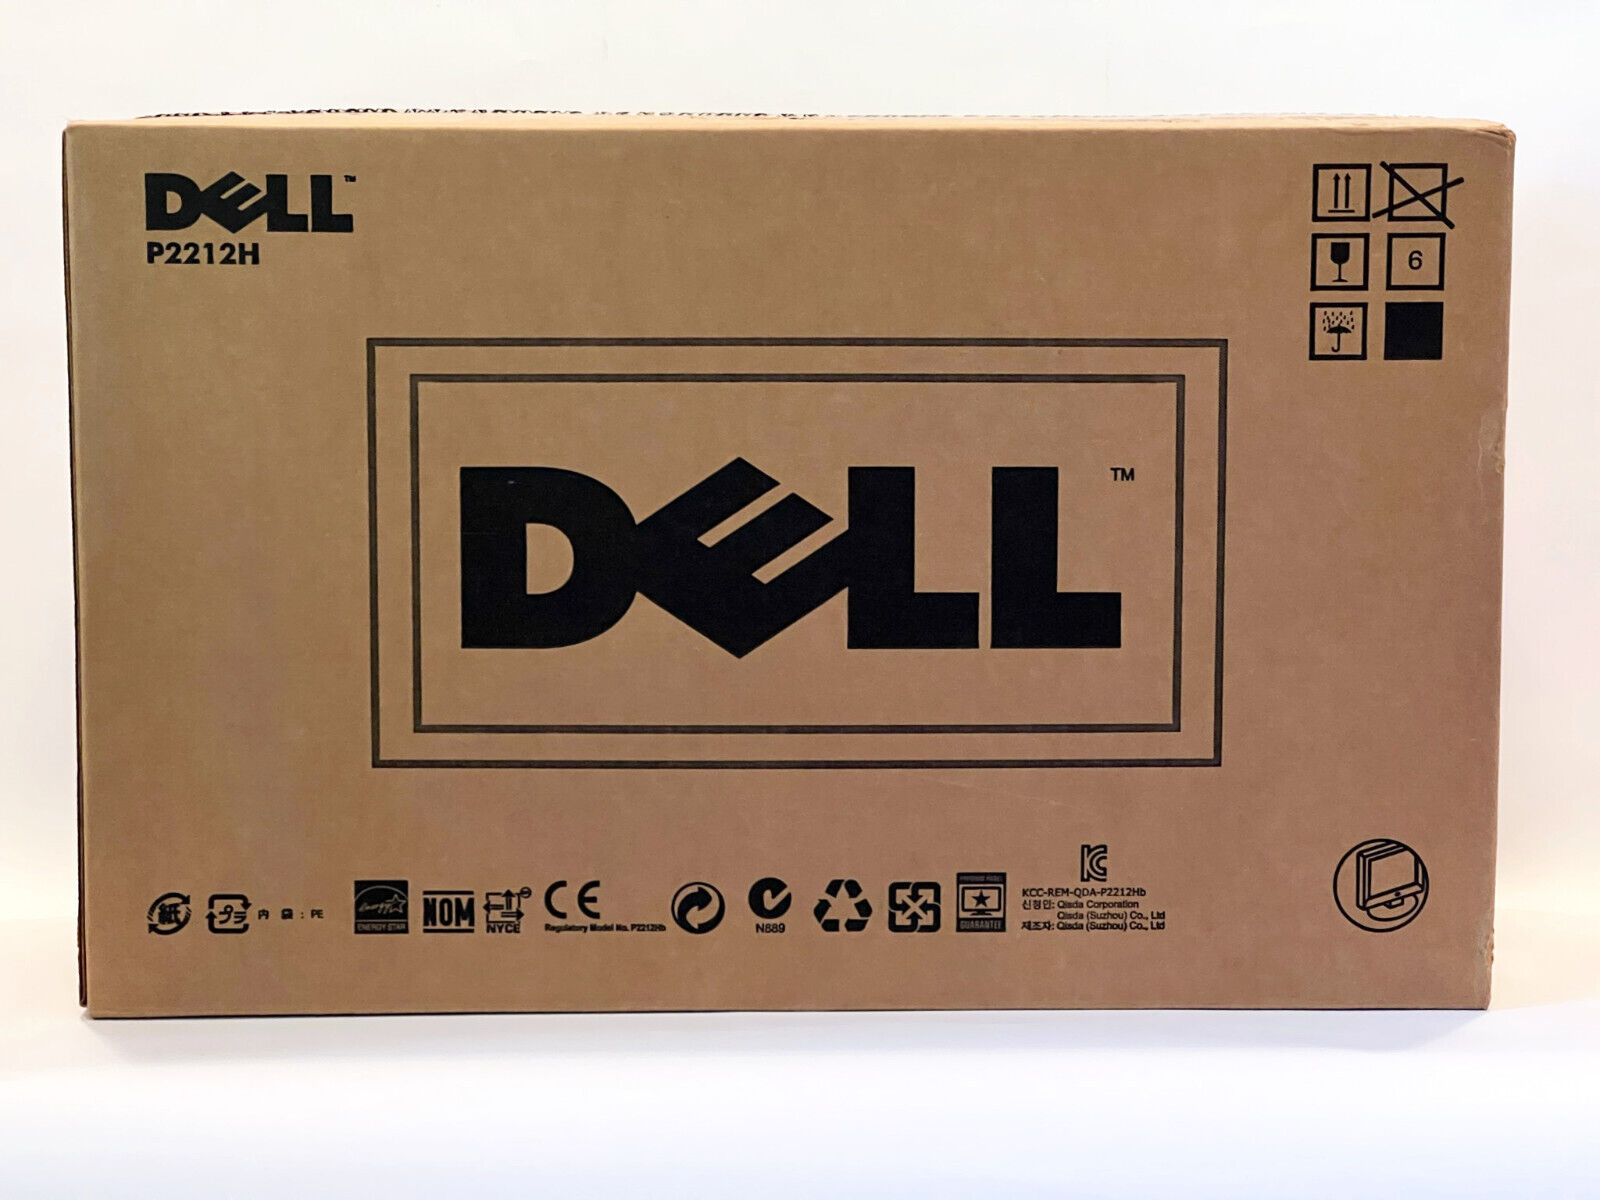 Dell Professional P2212H Monitor - Brand New - Never Opened - FACTORY SEALED Box